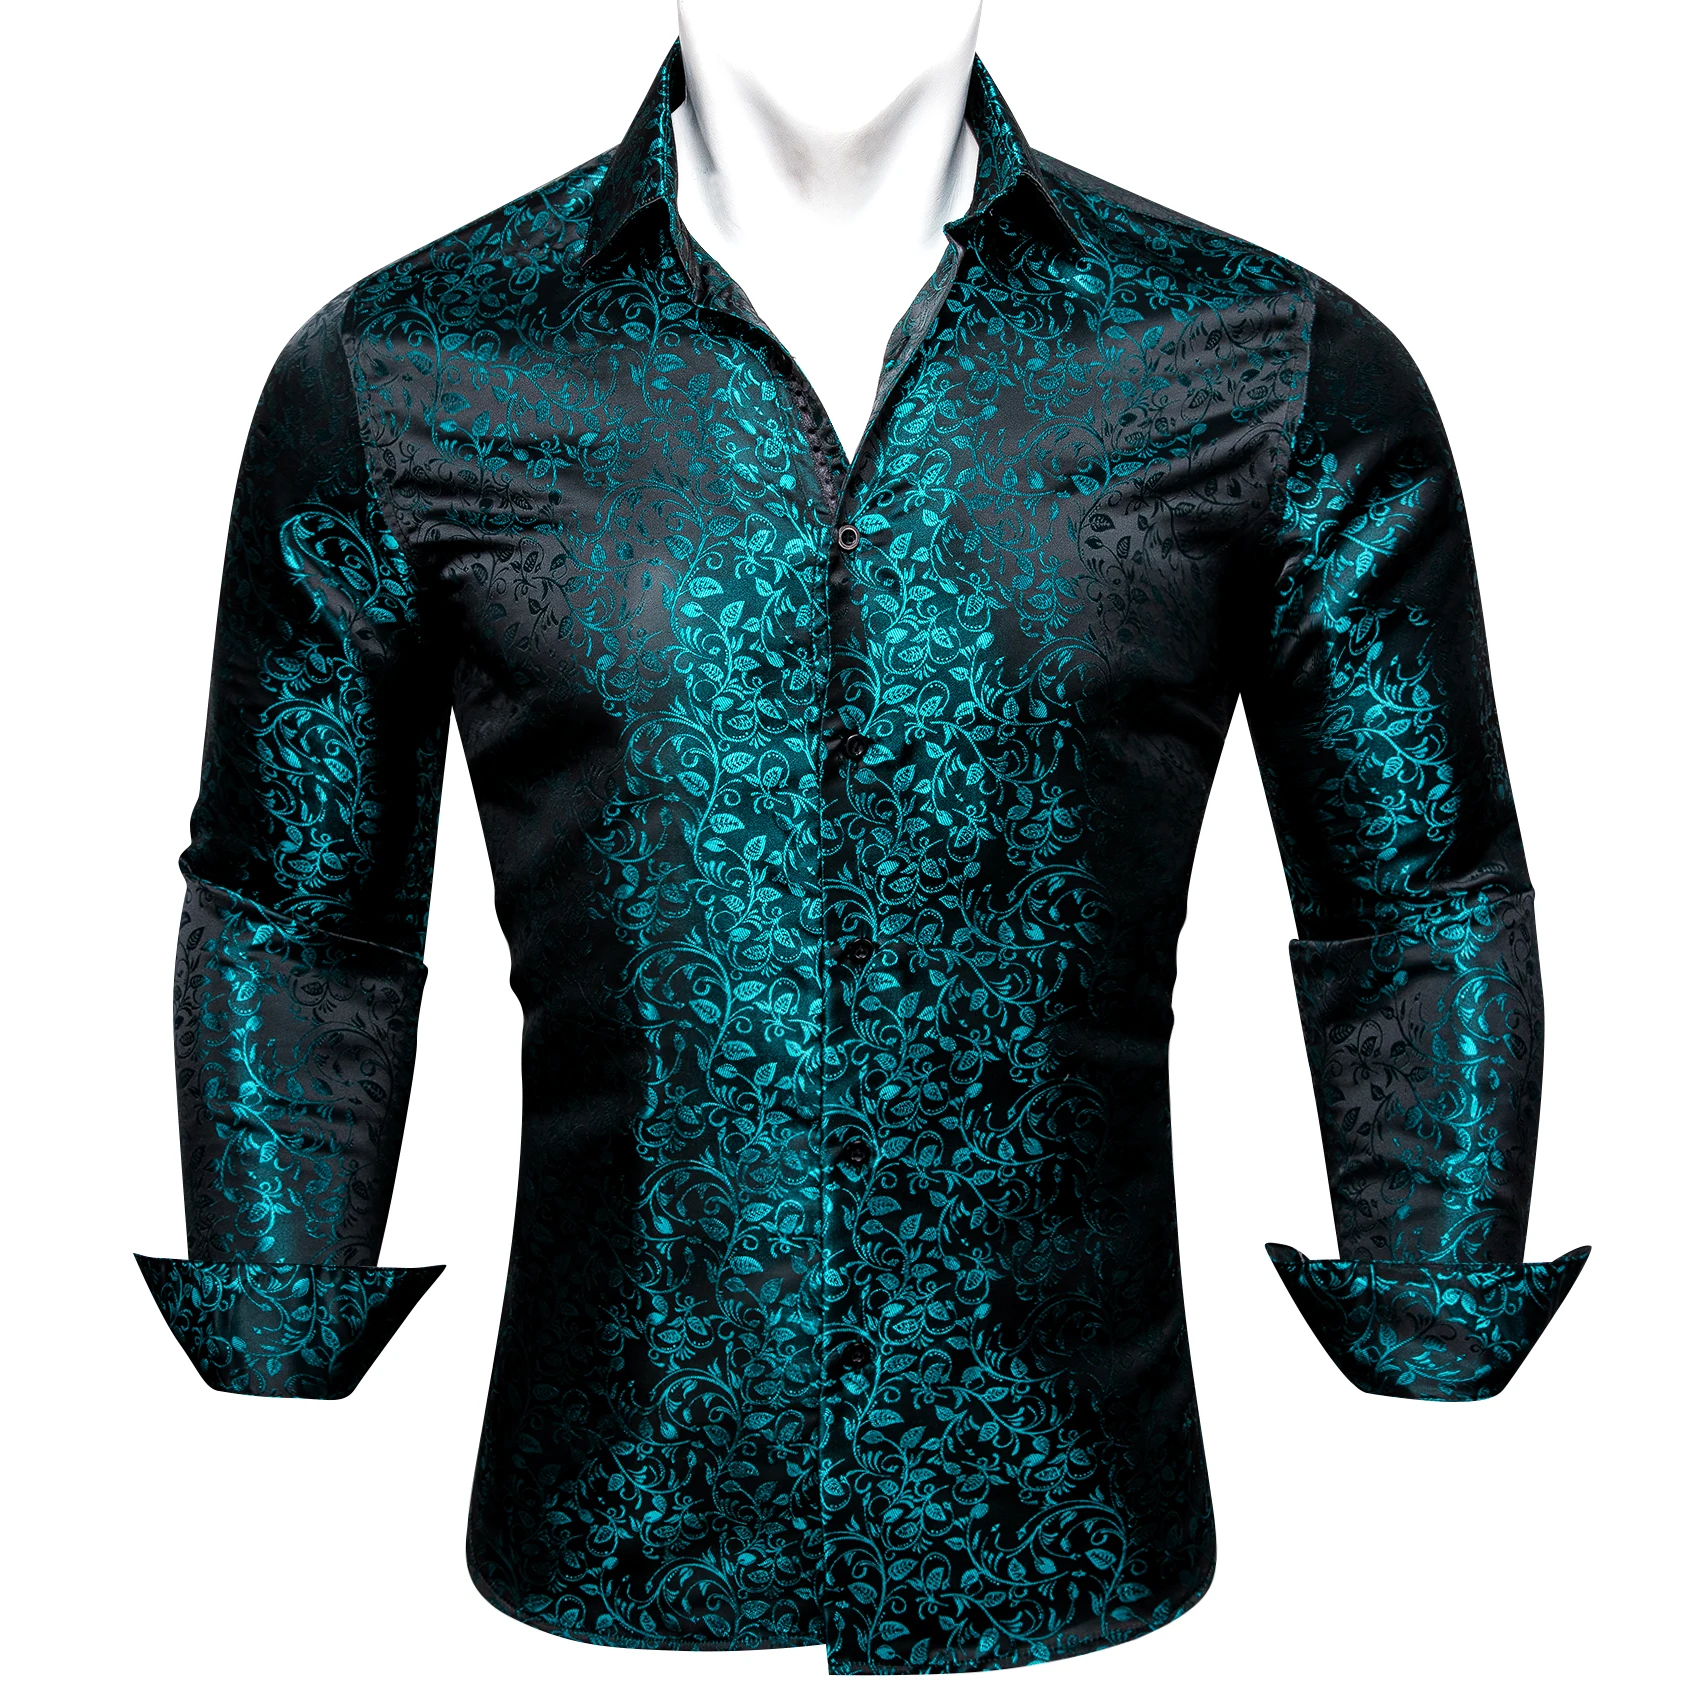 

Luxury Silk Shirts for Men Teal Blue Green Black Embroidered Spring Autumn Blouses Regular Slim Fit Male Tops Anti Wrinkle 659